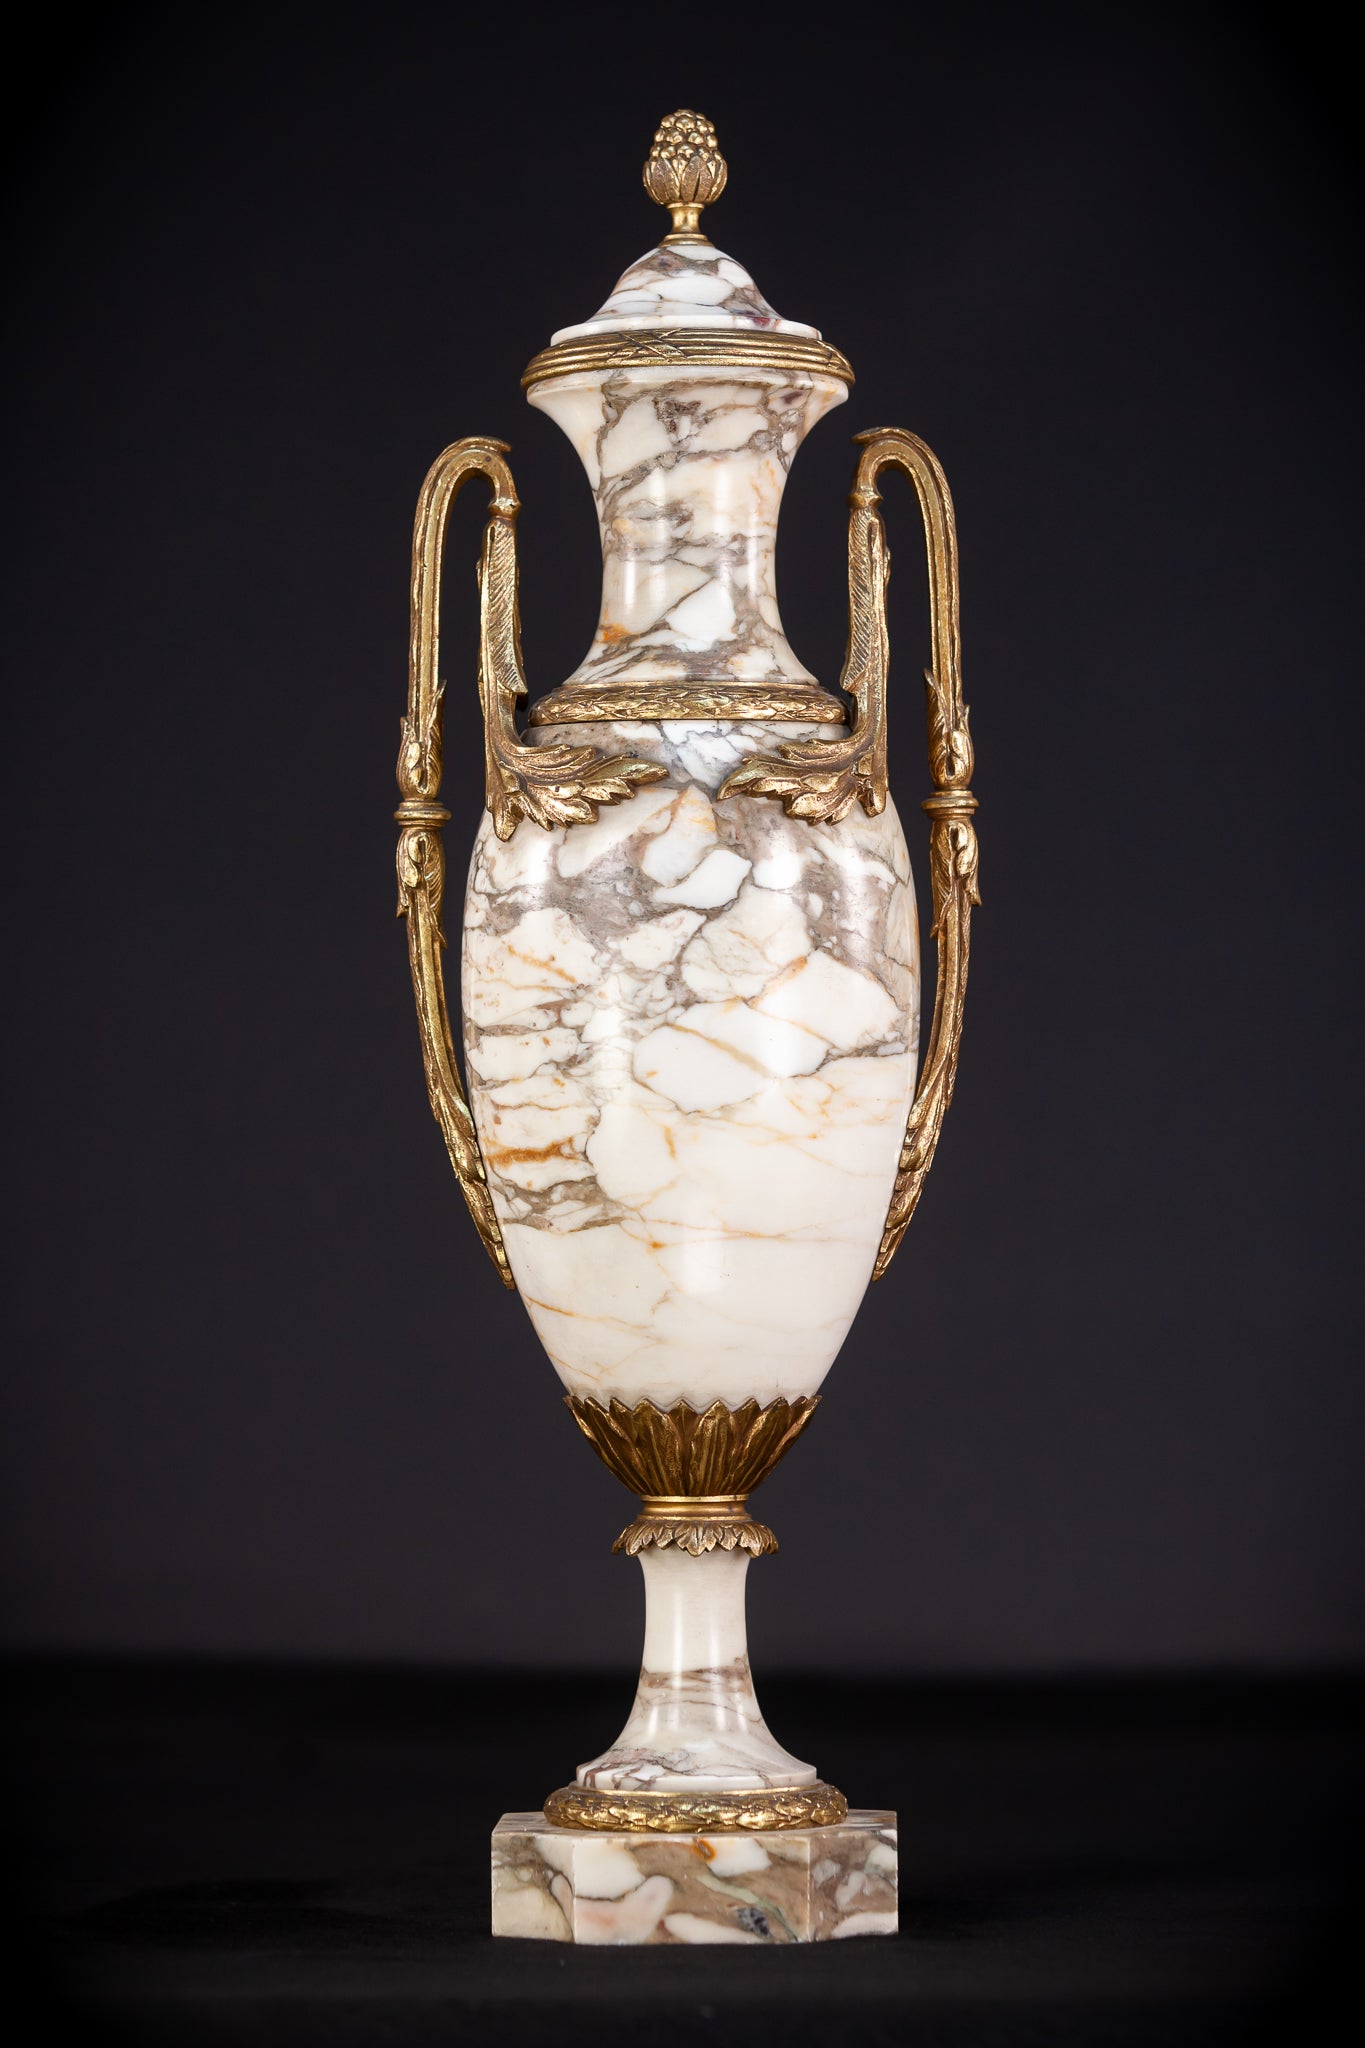 Pair of Urns | White Marble and Gilt Bronze | 1800s Antique | 18.3"/ 46.5 cm